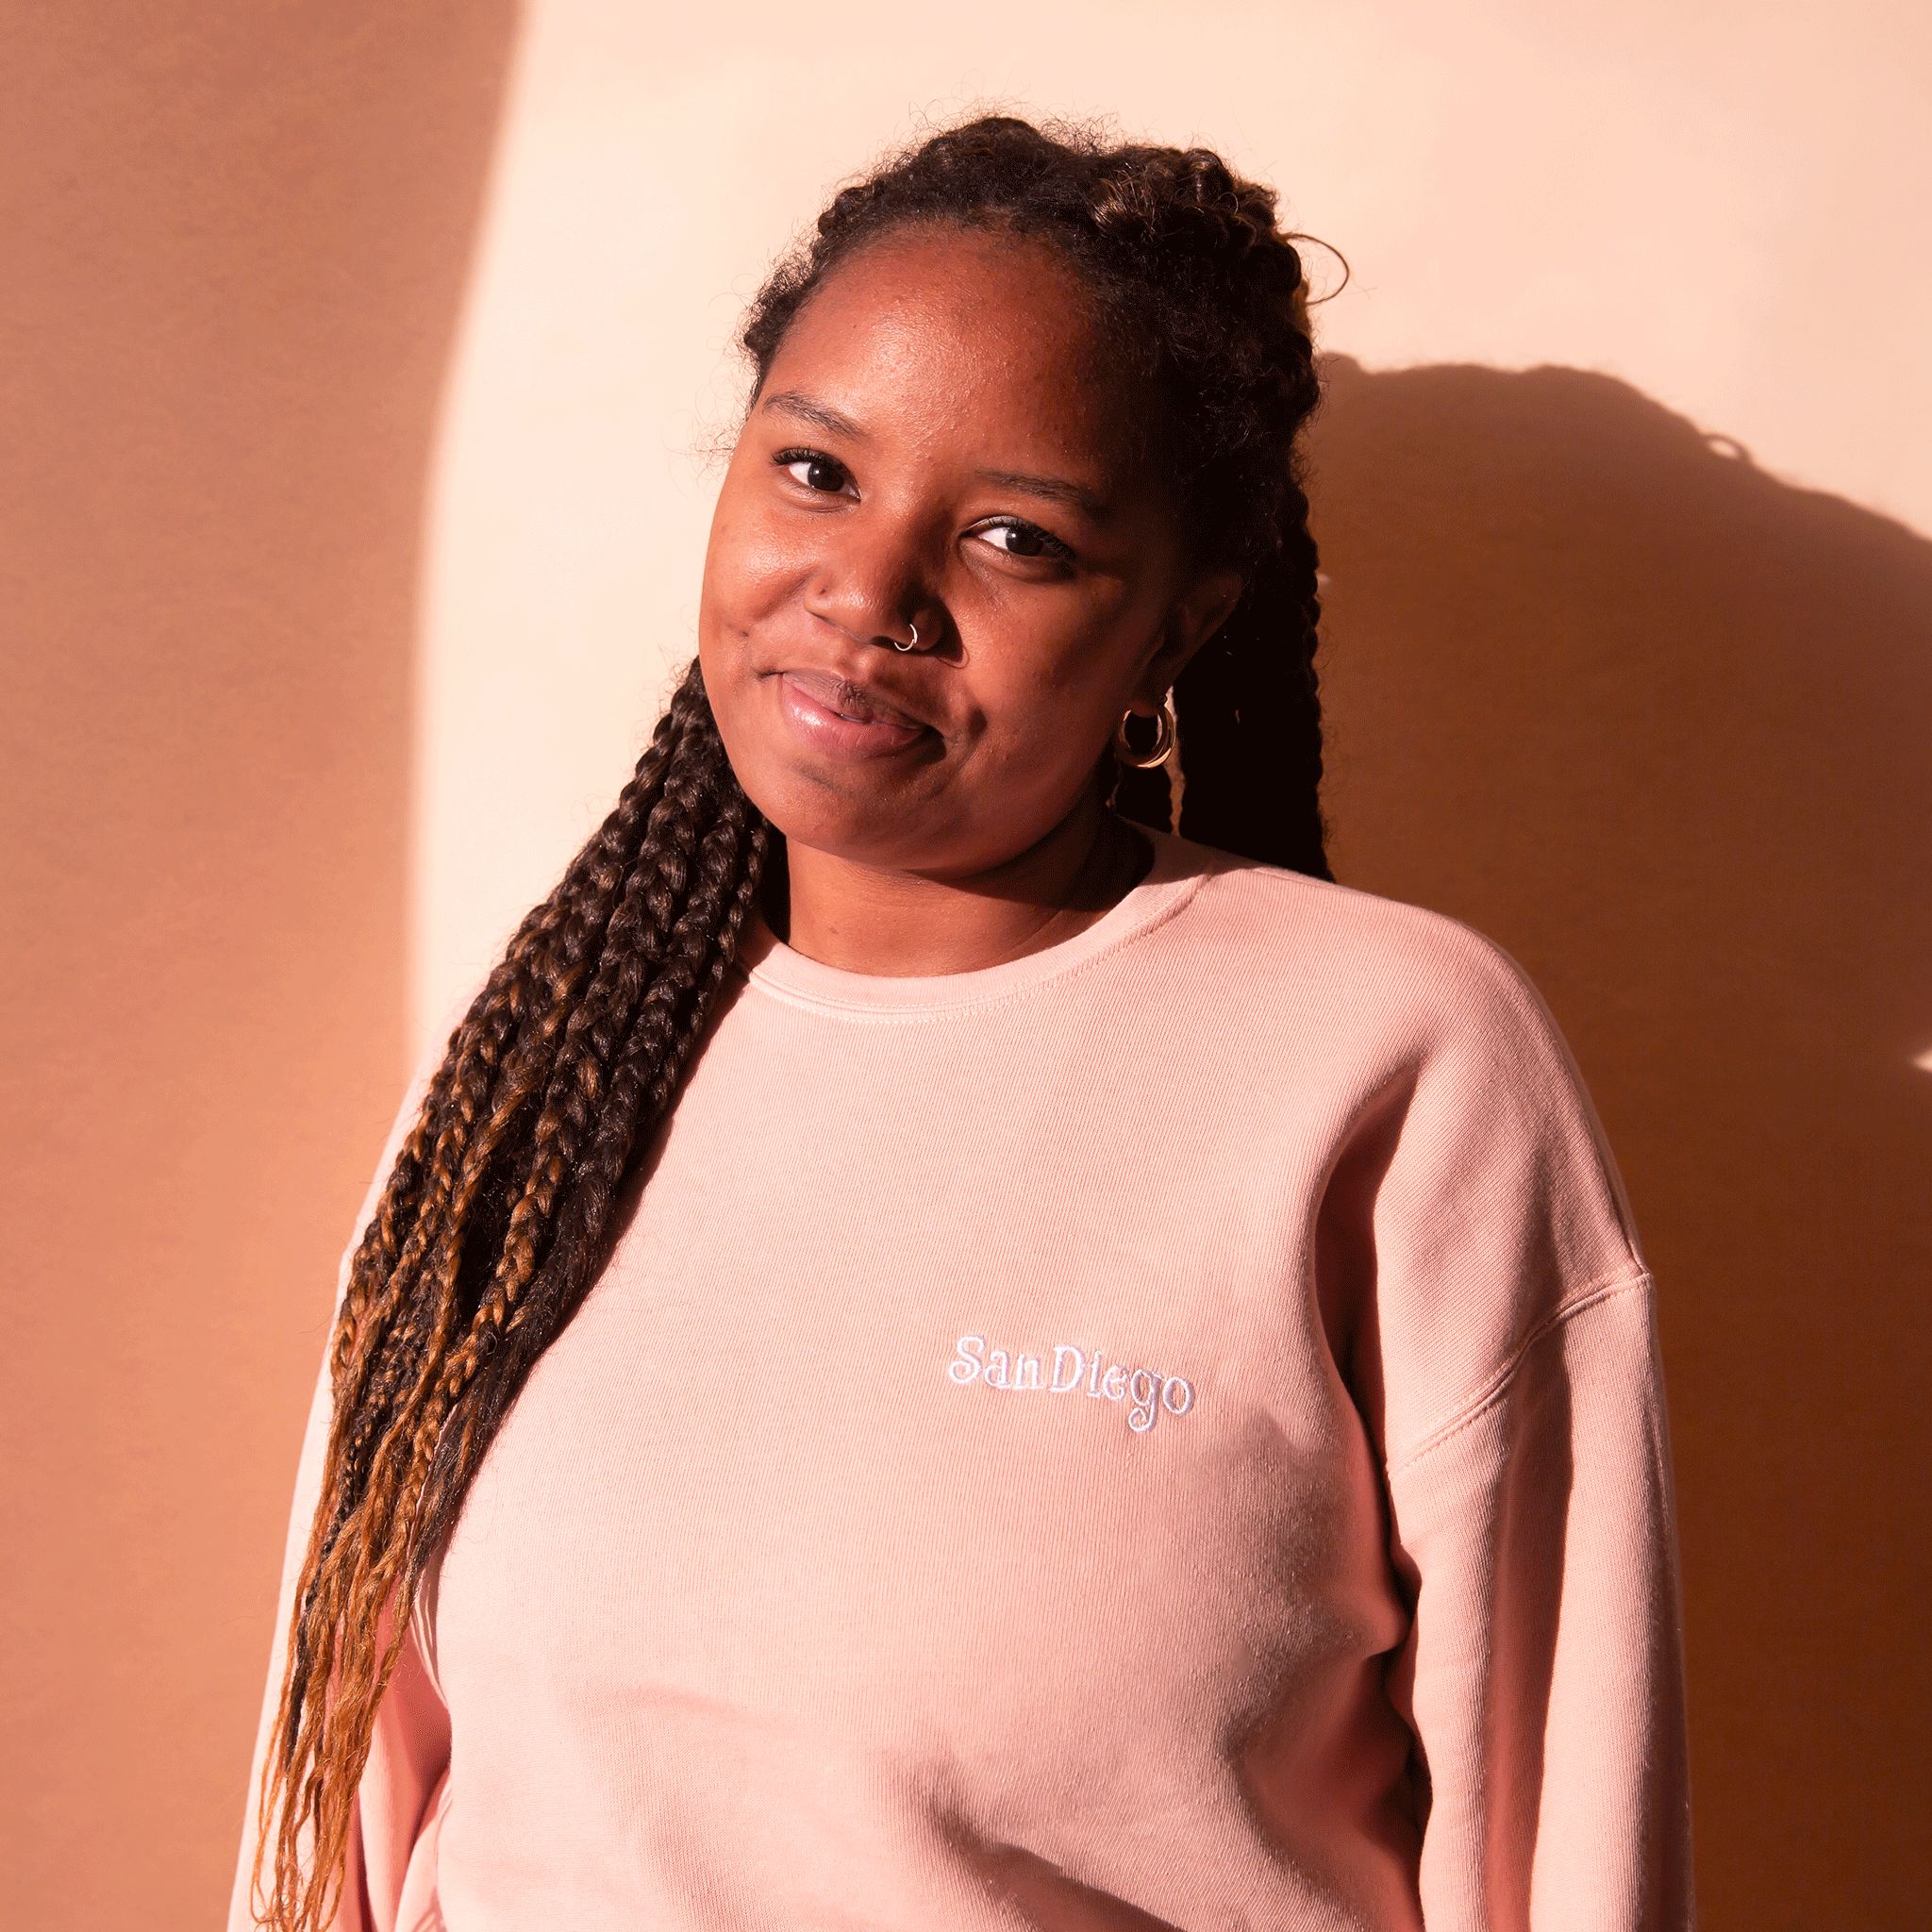 On a peach background is a peachy pink pull over sweatshirt with a white embroidered &quot;San Diego&quot; on the front.